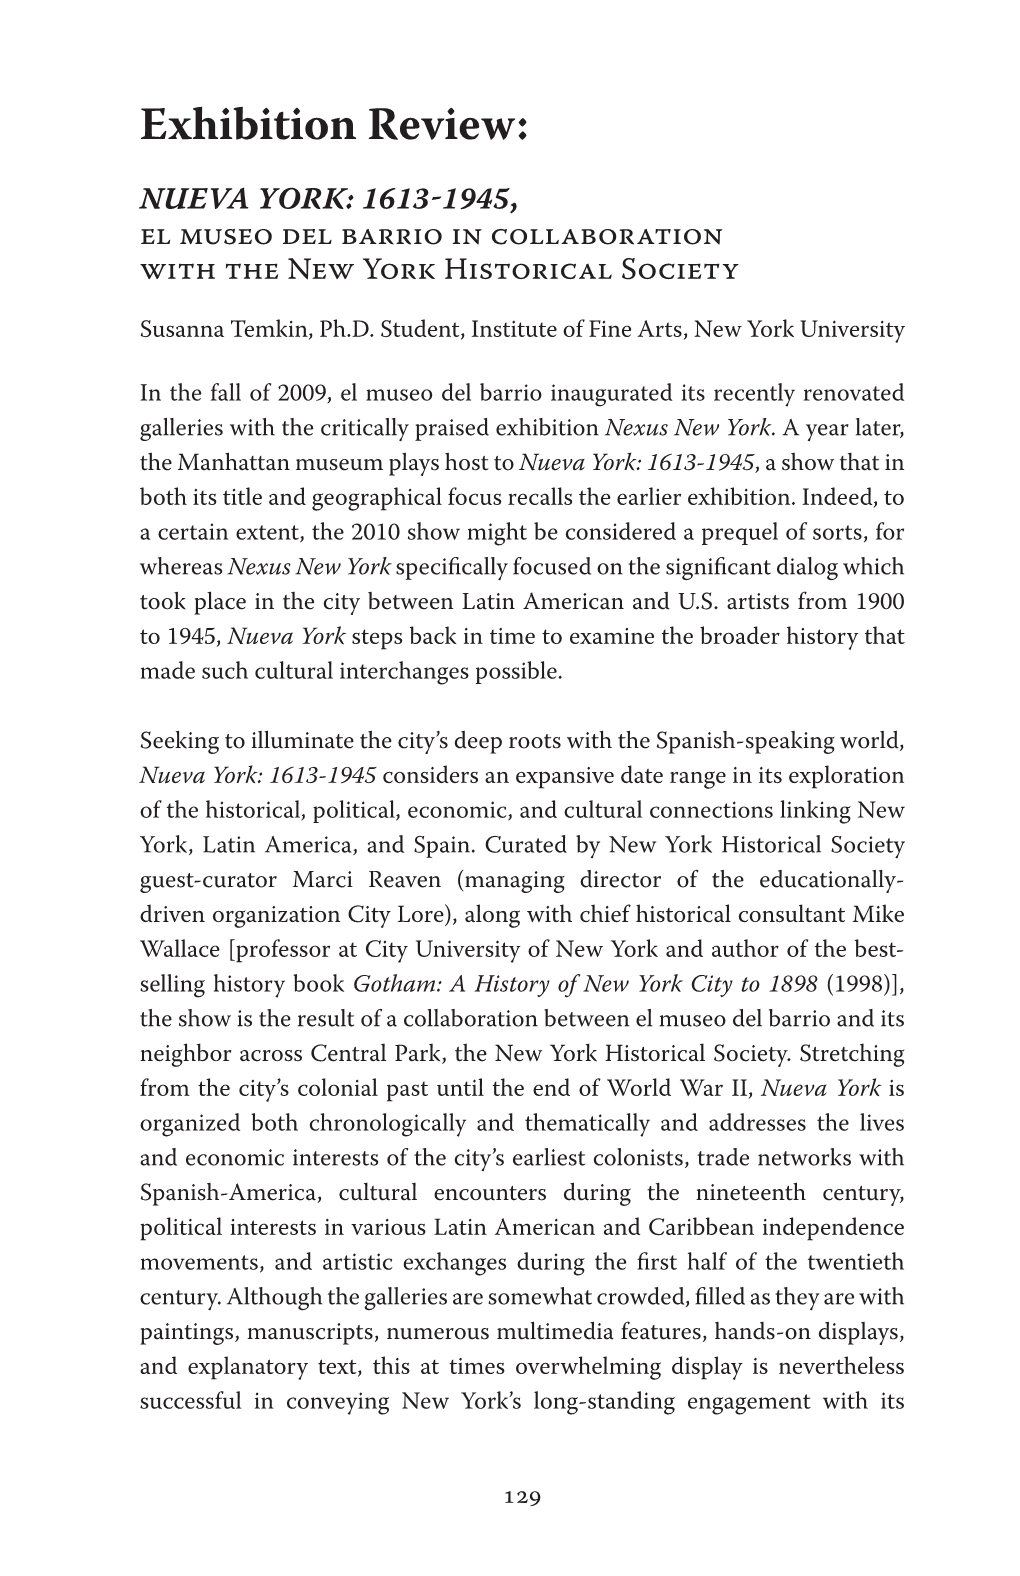 1613-1945, El Museo Del Barrio in Collaboration with the New York Historical Society